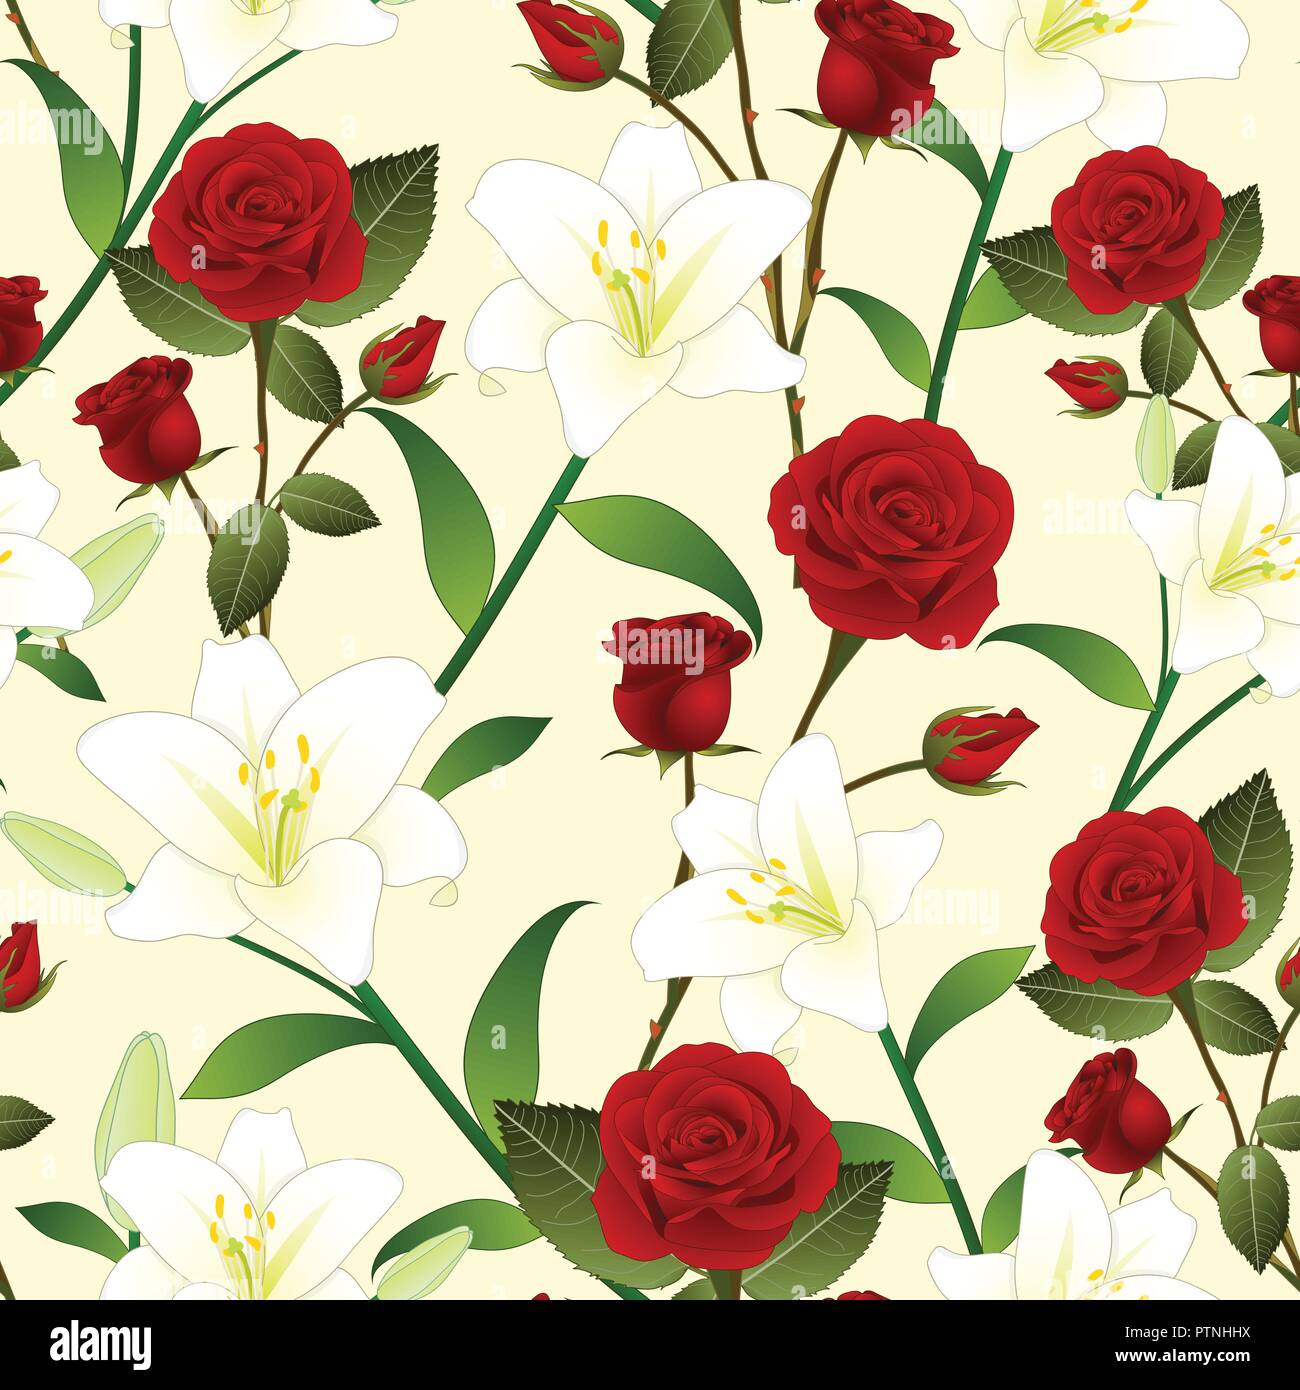 Red Rose and White Lily Flower Seamless Christmas Beige Ivory Background. Vector Illustration. Stock Vector